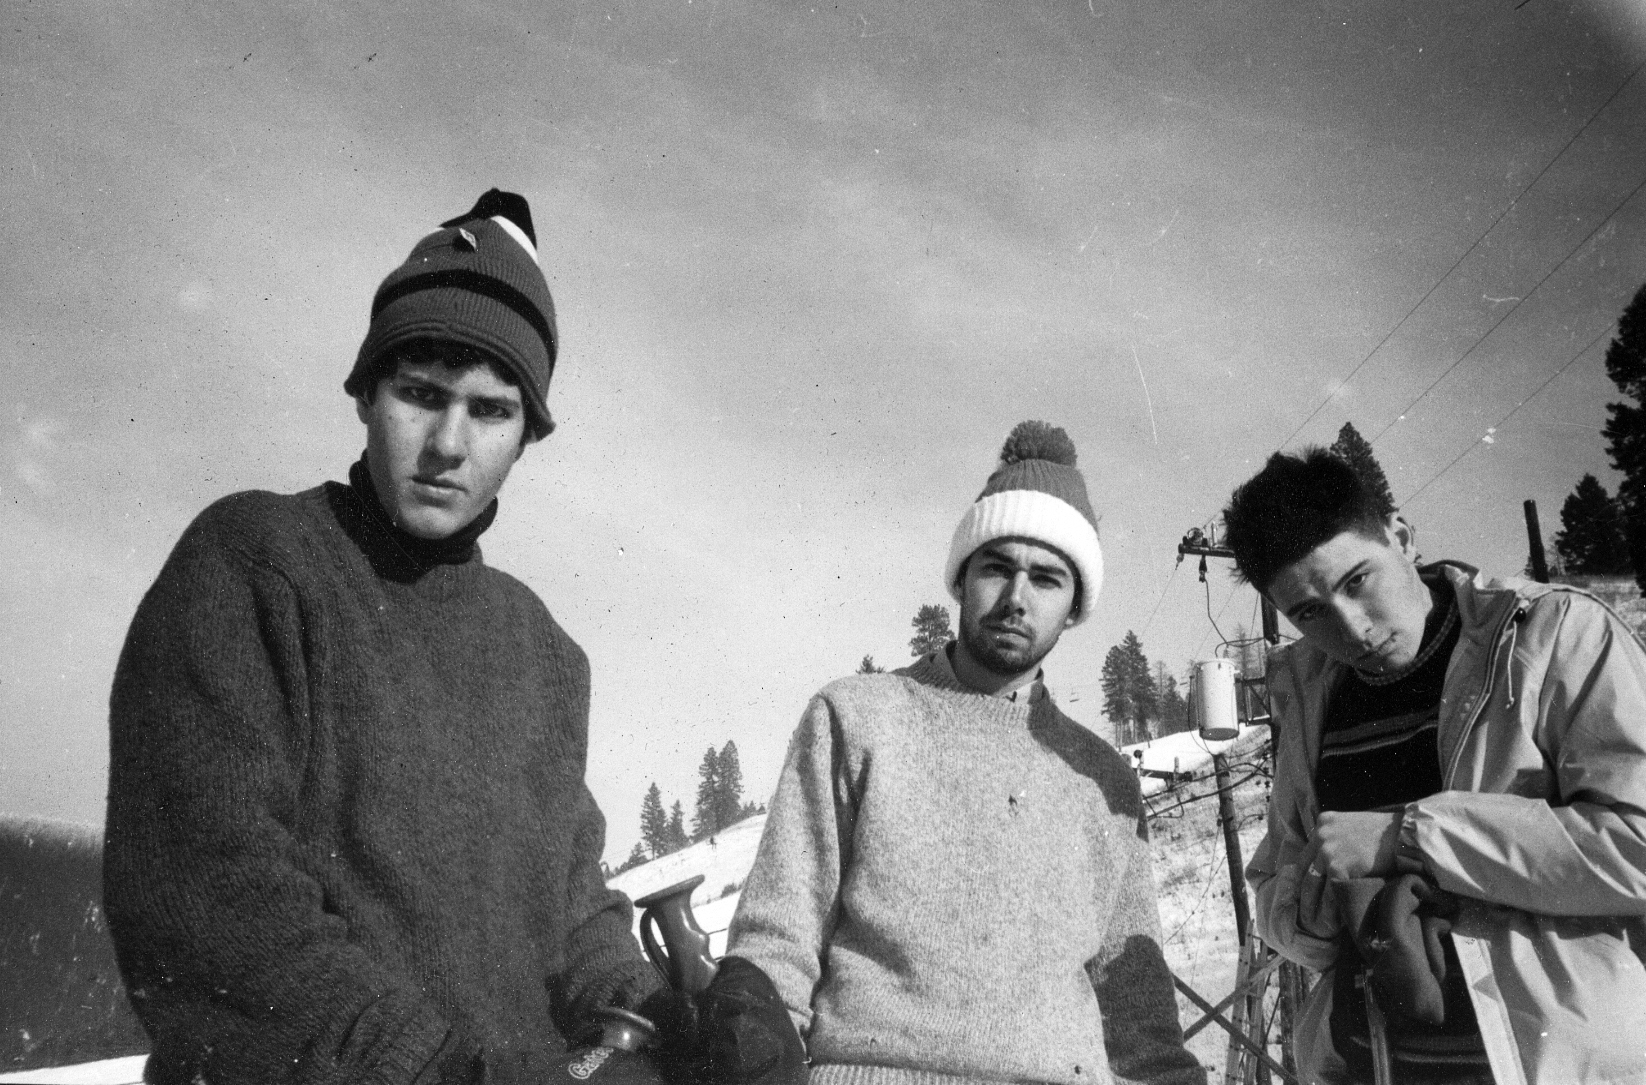 From left: Mike D, MCA and Ad-Rock on the first stop of their Licensed to Ill tour in Missoula, Mont., Jan. 1987.